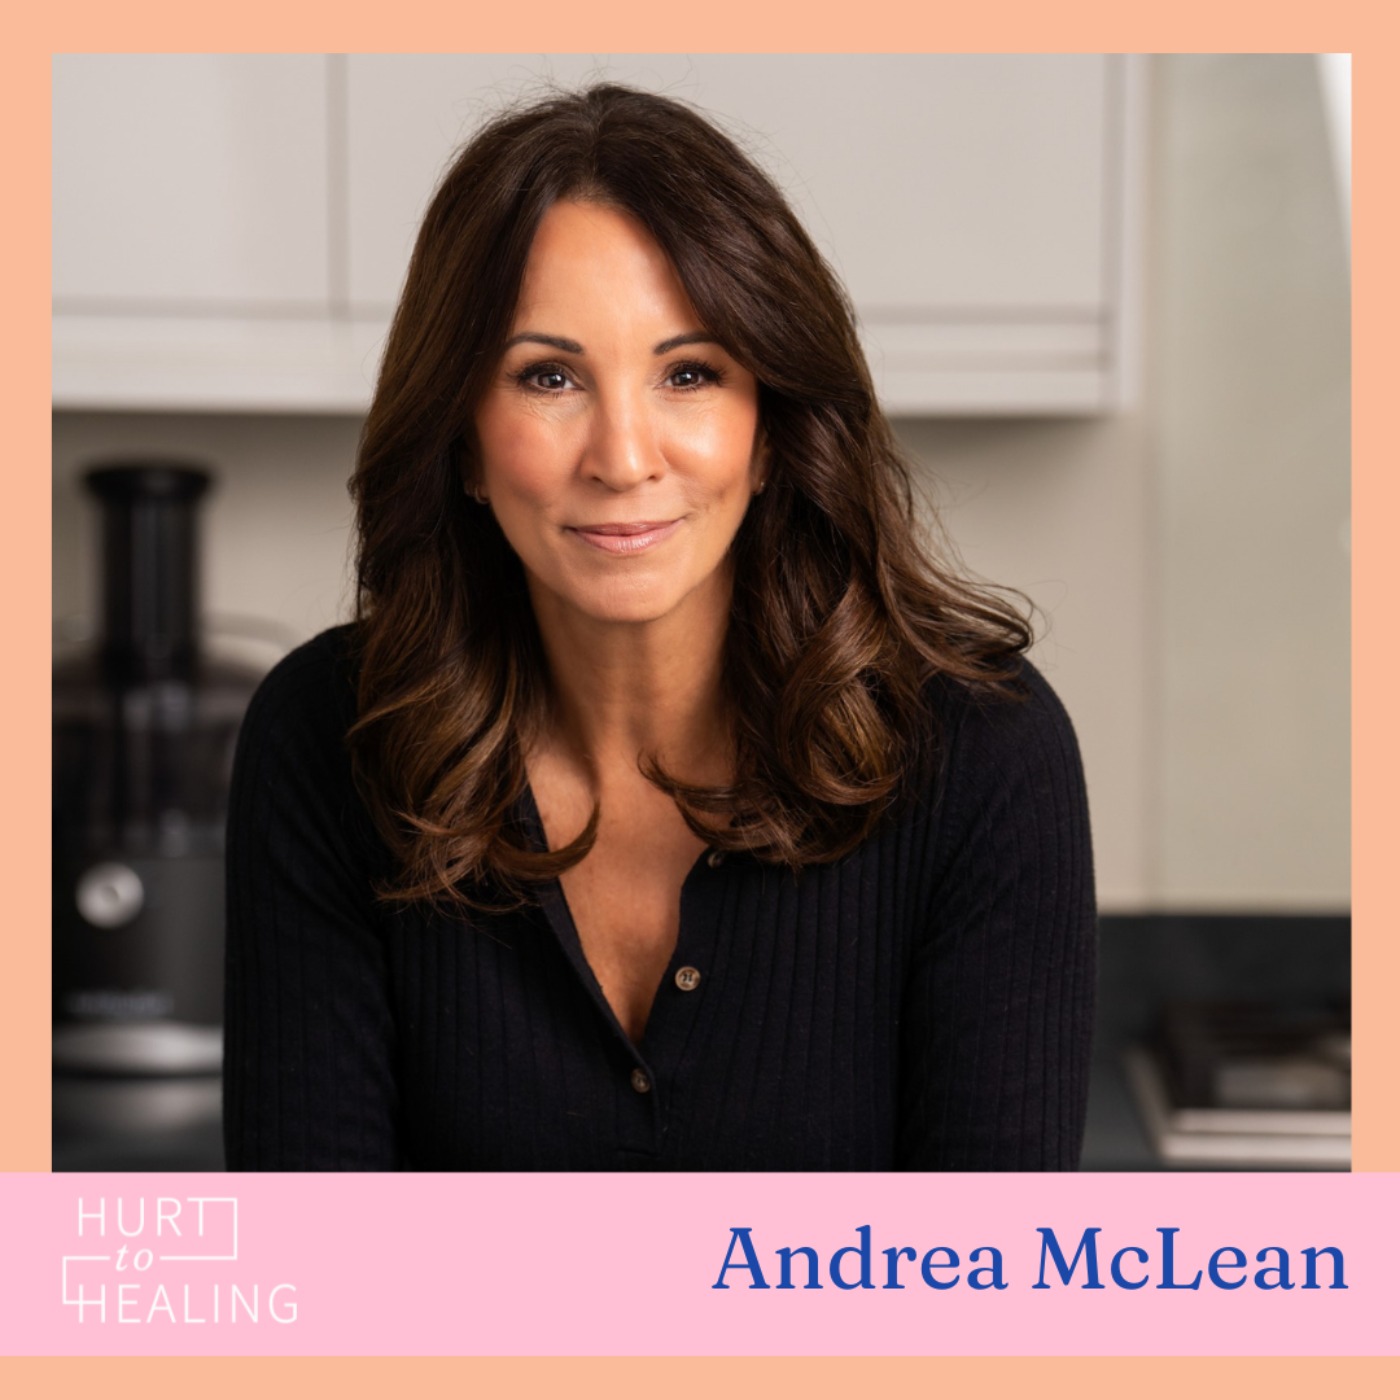 Andrea McLean on mastering resilience in relationships